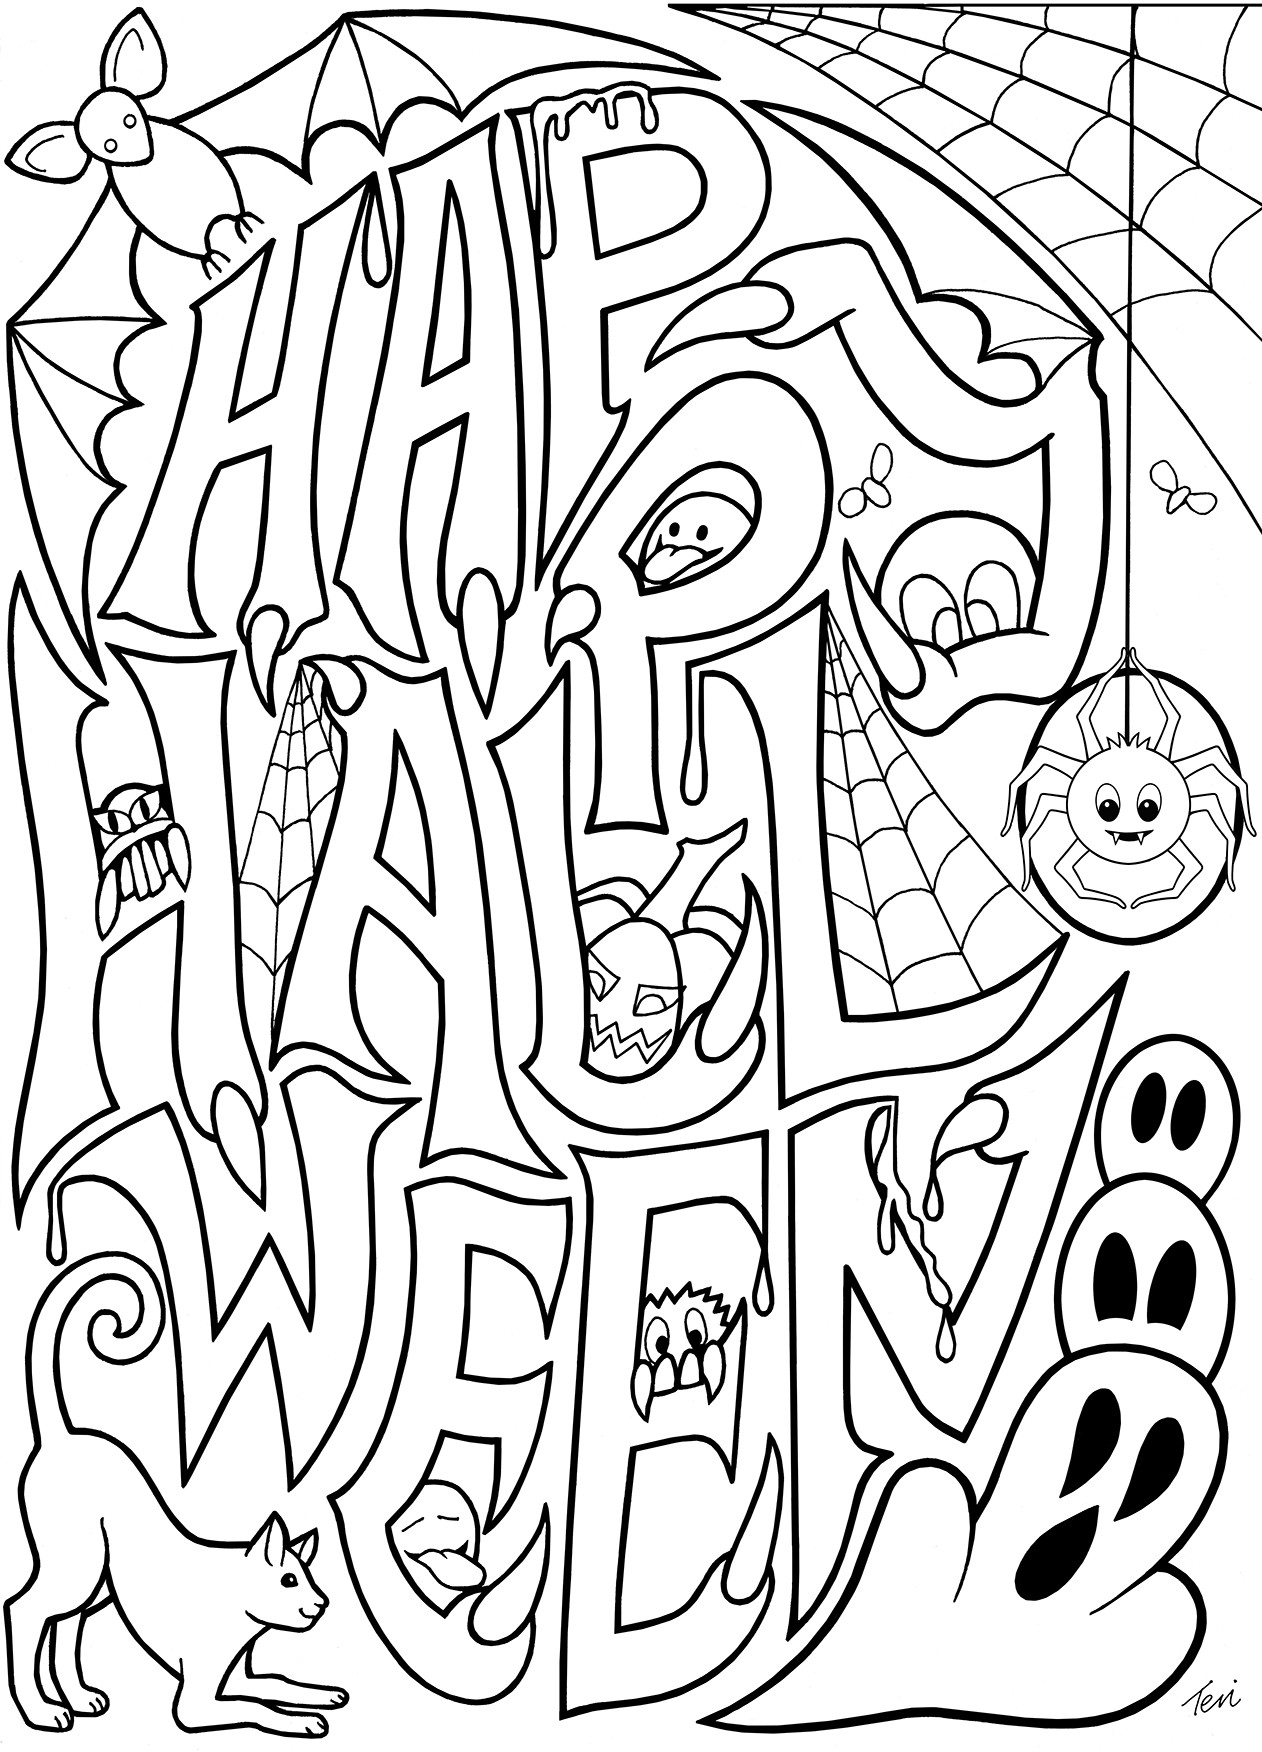 Halloween Coloring Pages Free Printable
 Free Adult Coloring Book Pages Happy Halloween by Blue